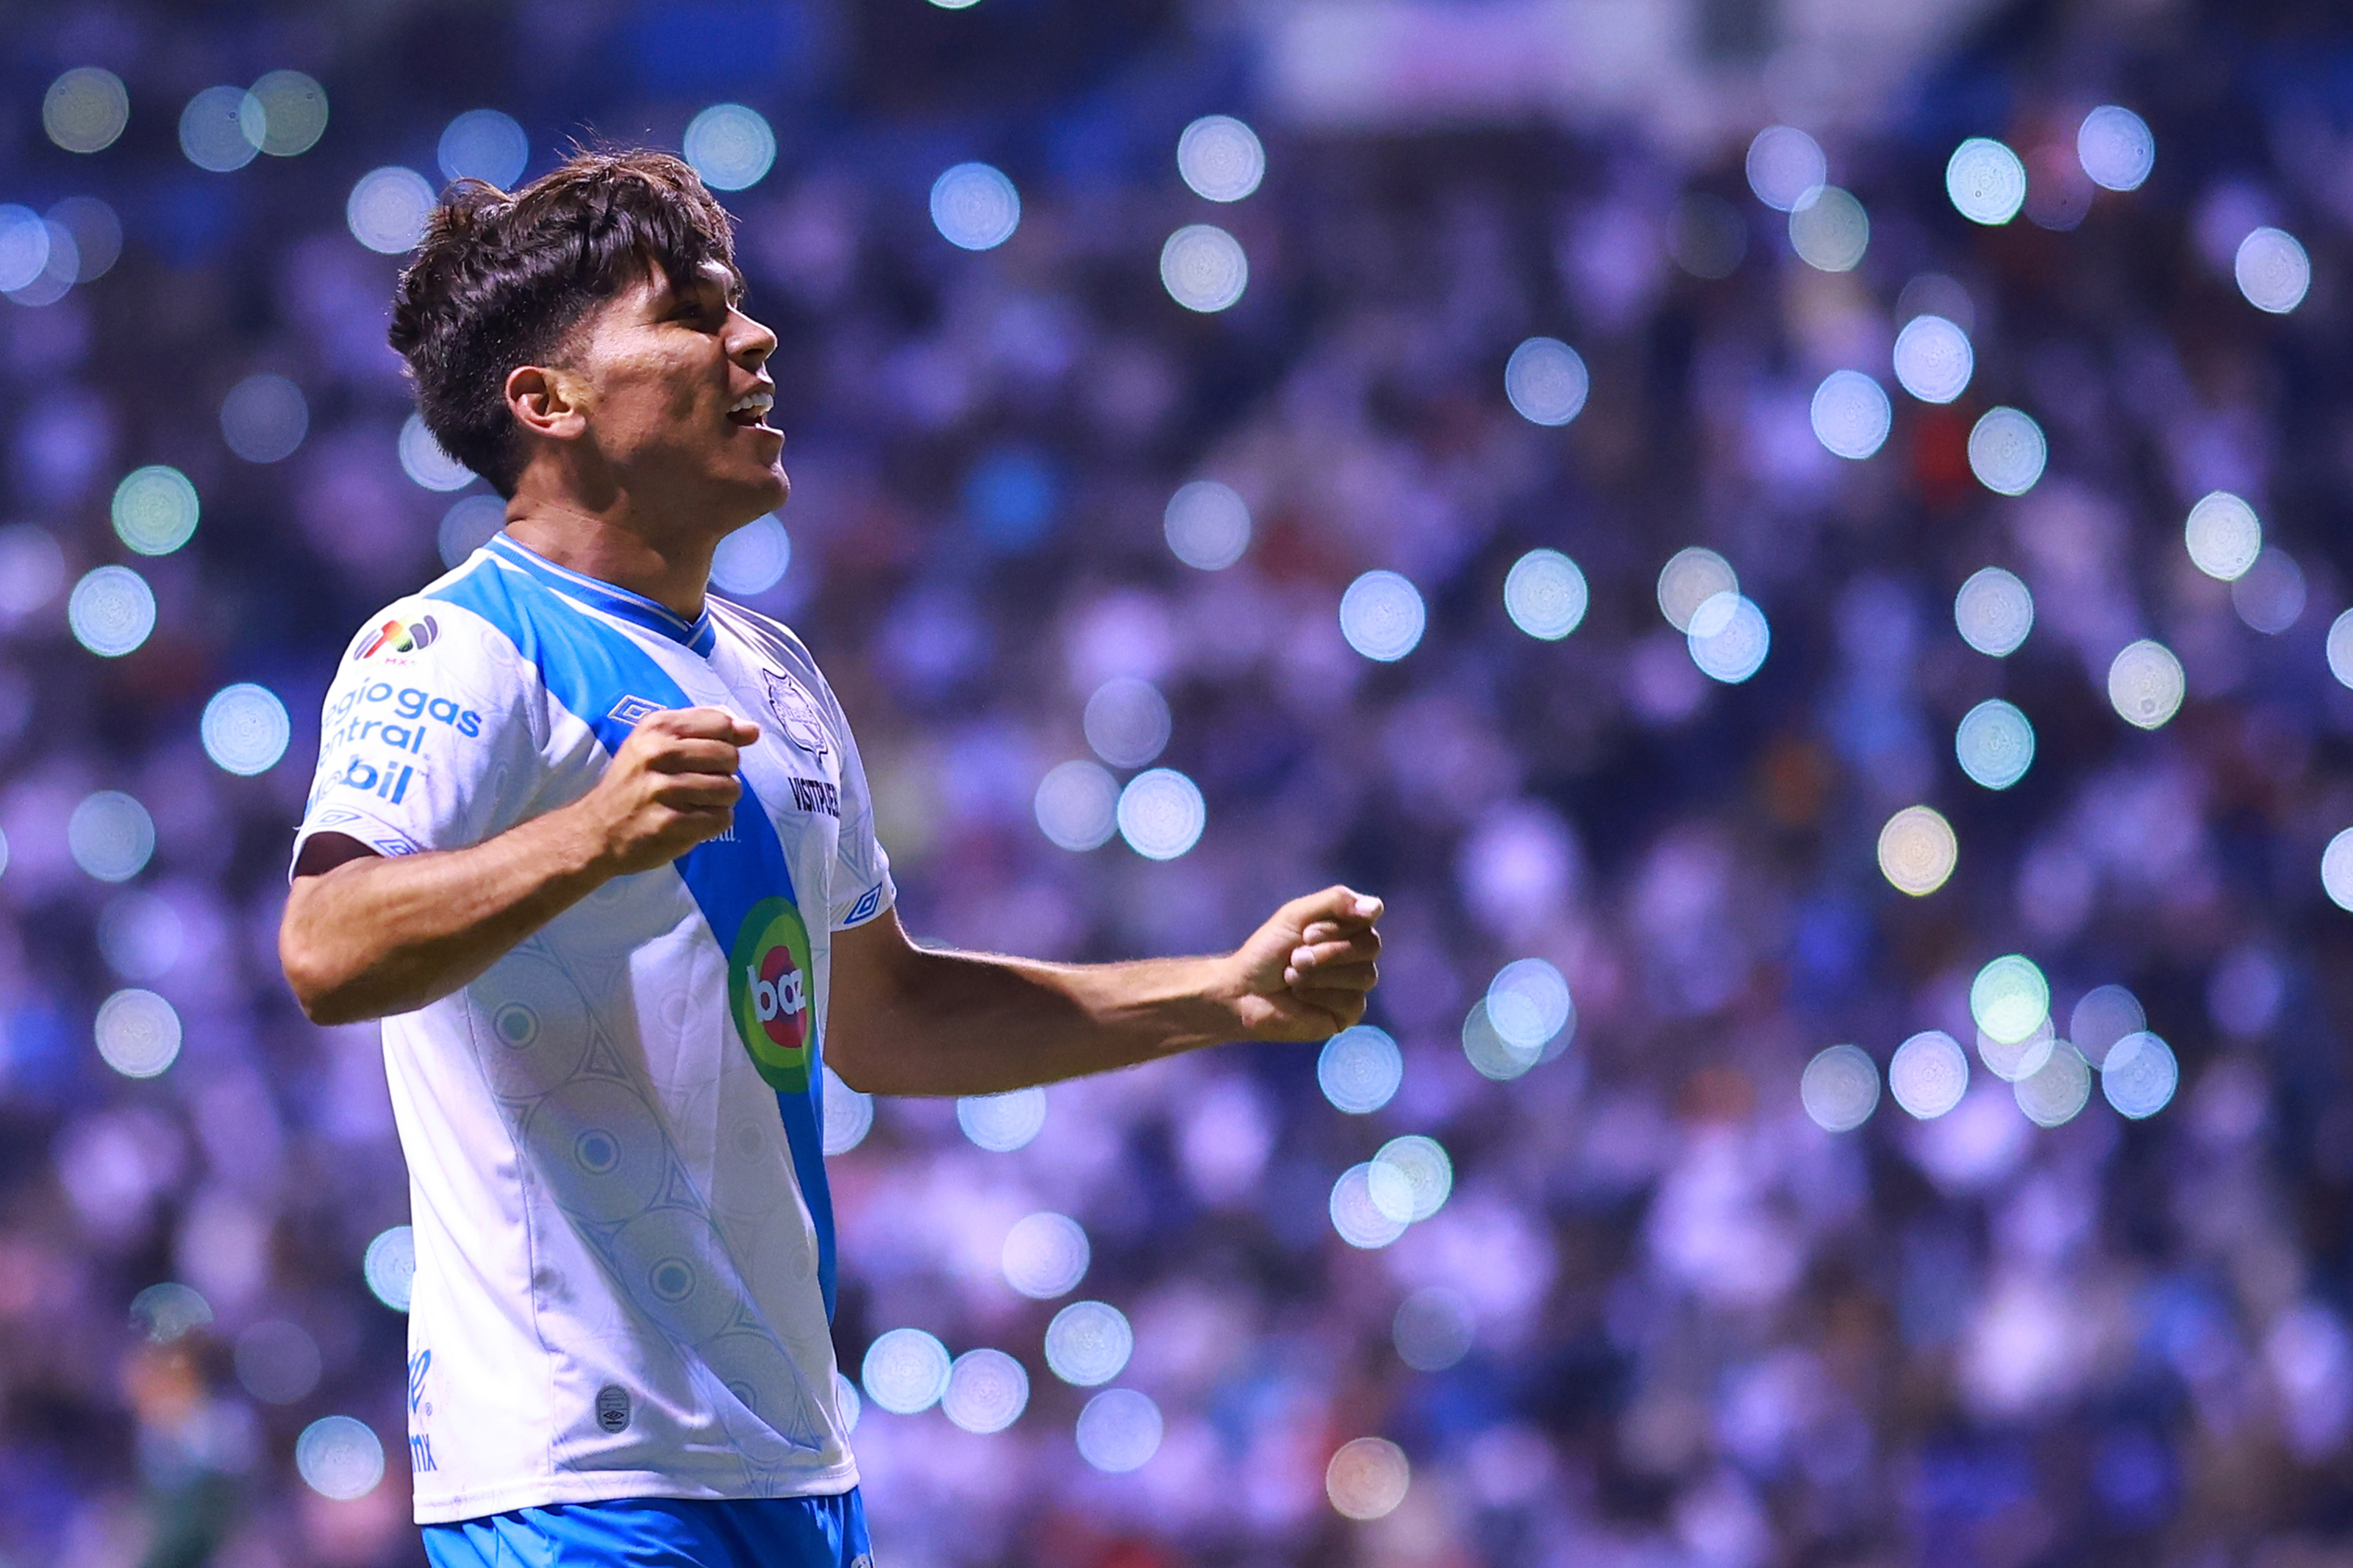 Martin Barragan of Puebla celebrates after scoring his team’s second goal during the 11th round match between Puebla and Santos Laguna as part of the Torneo Grita Mexico C22 Liga MX at Cuauhtemoc Stadium on March 18, 2022 in Puebla, Mexico.